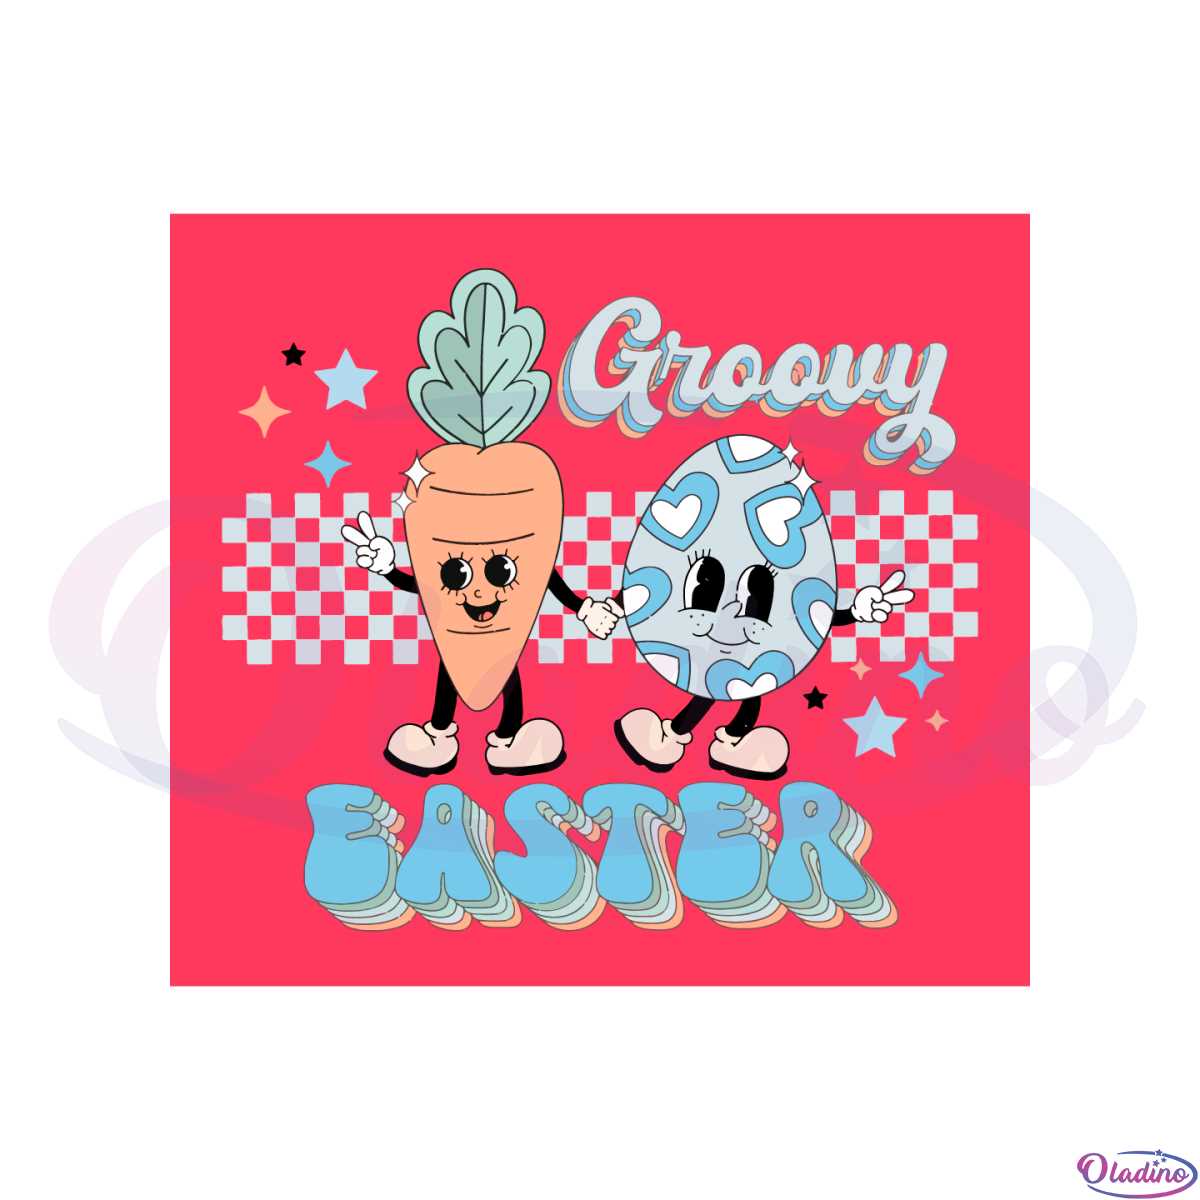 groovy-easter-cute-easter-carrot-eggs-svg-graphic-designs-files